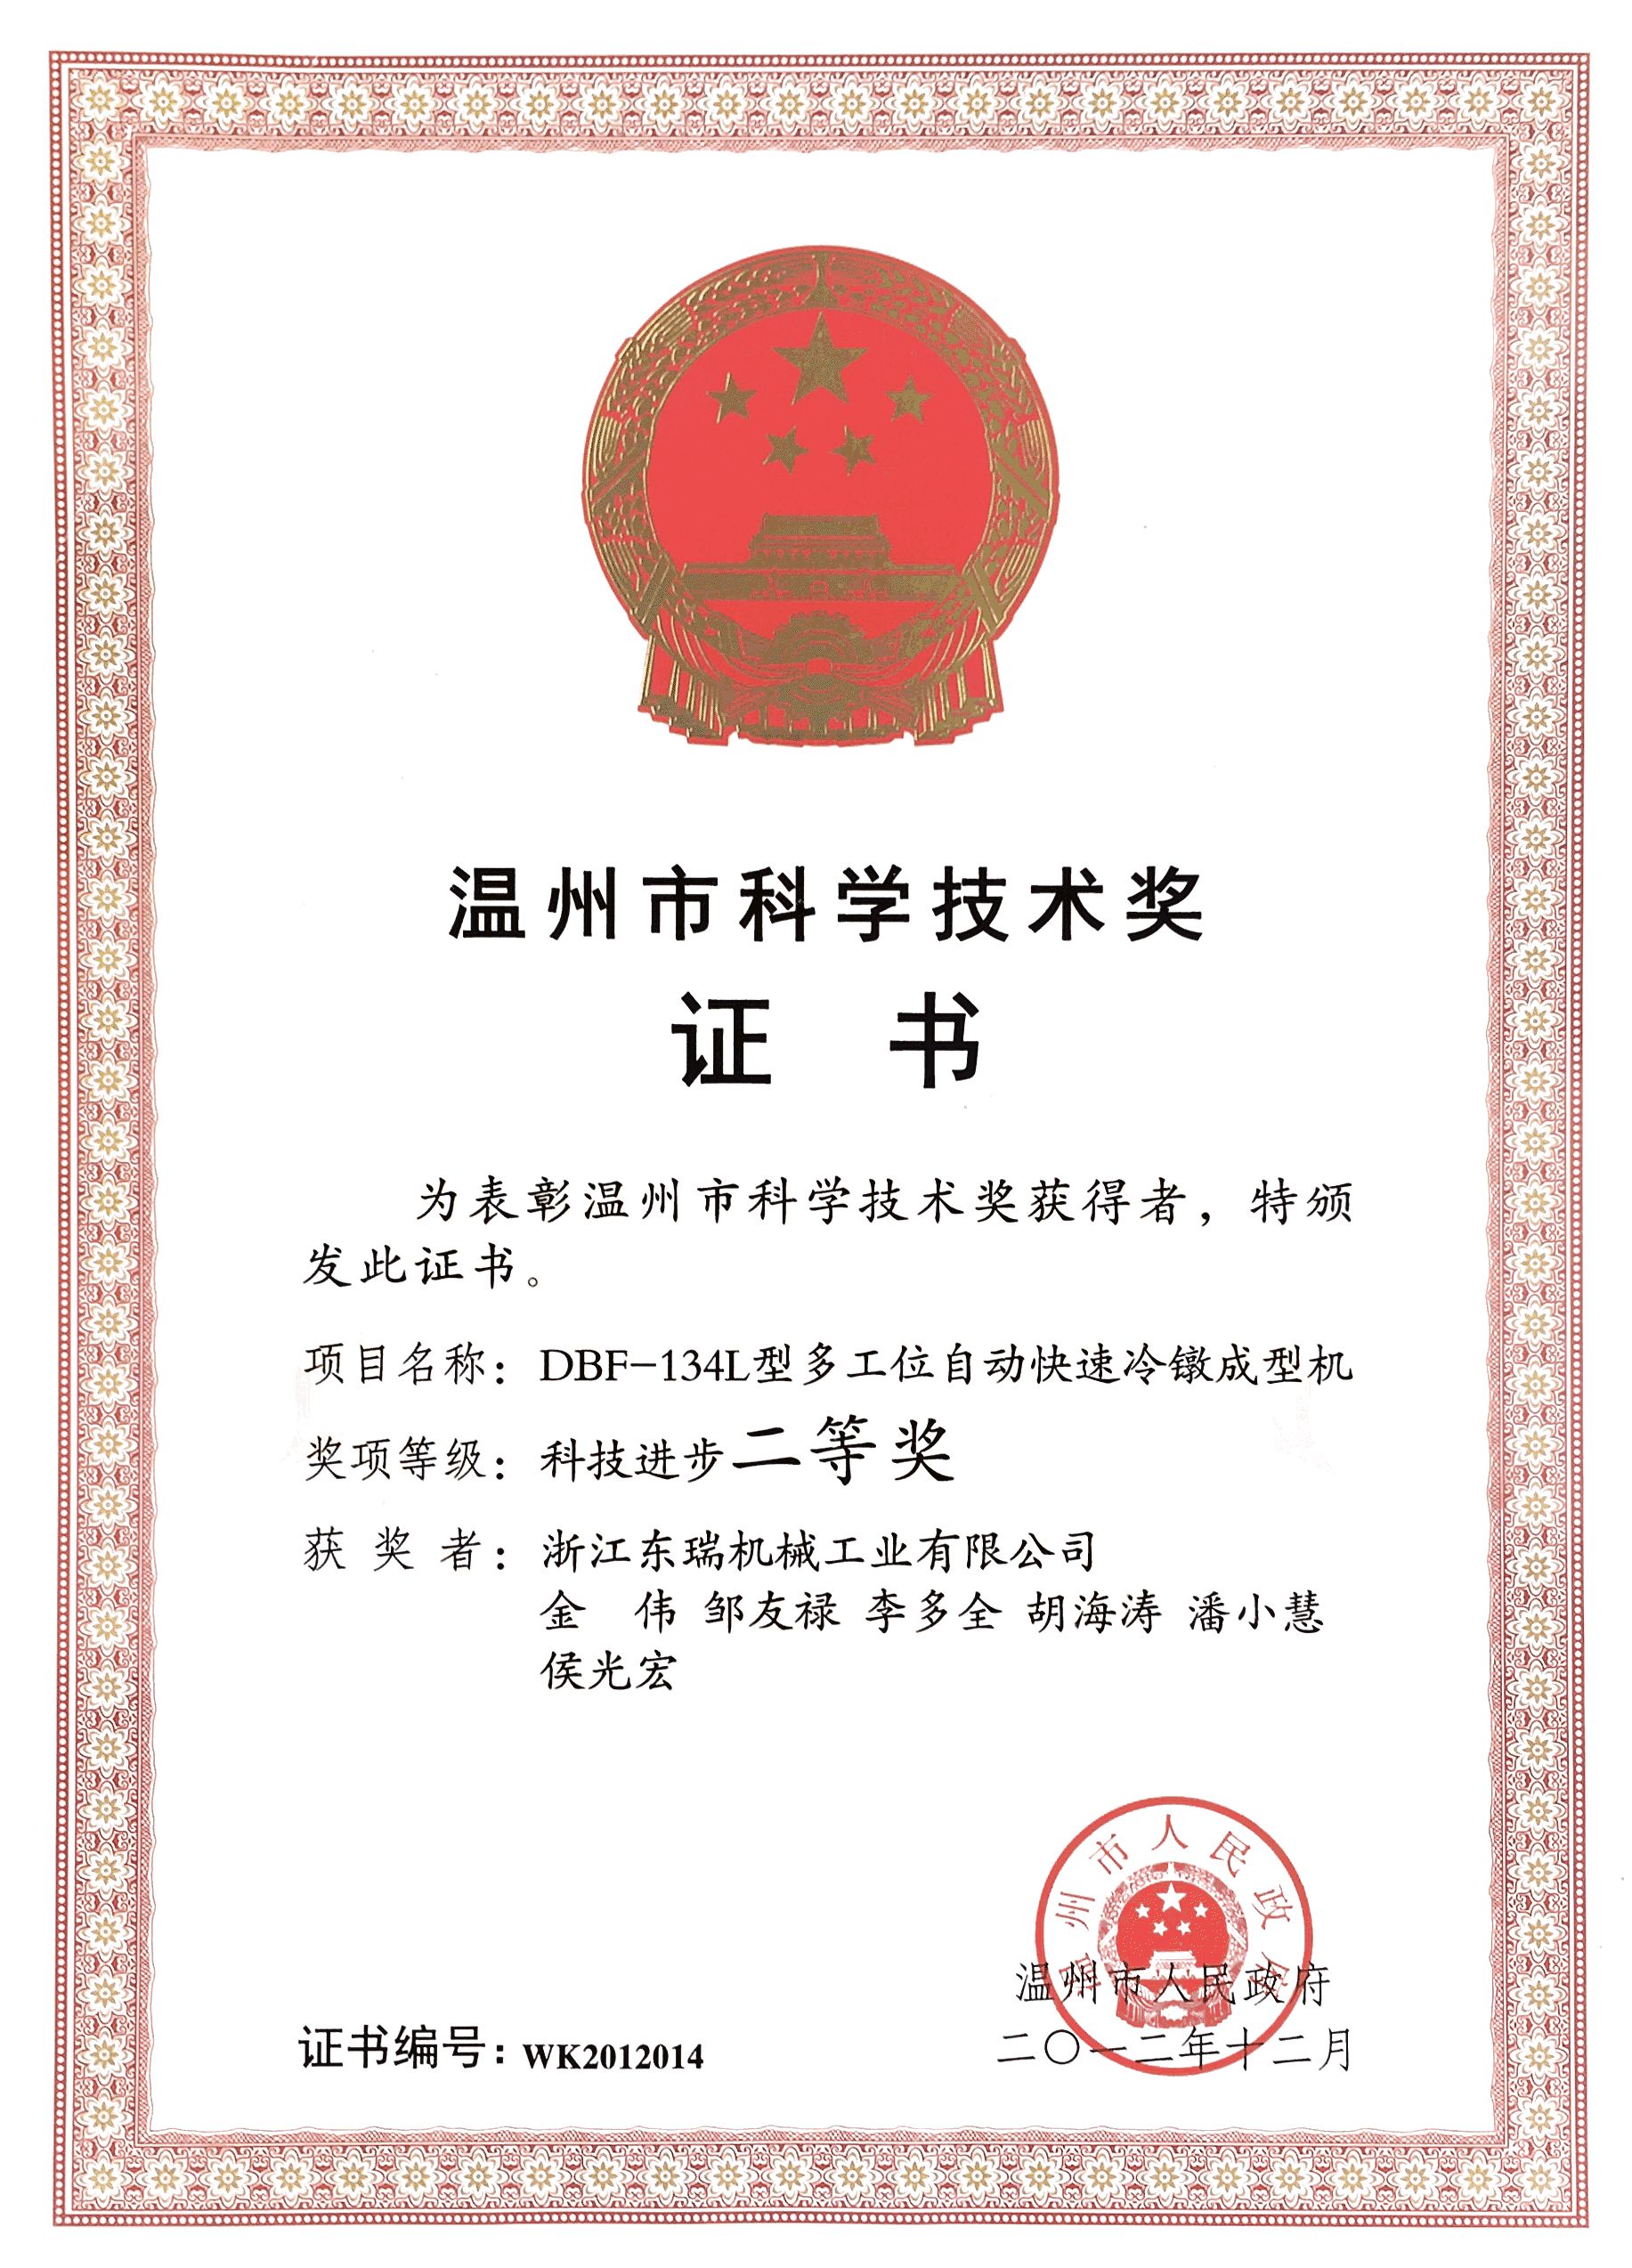 Second Prize of DPF-134L Wenzhou Science and Technology Progress Award